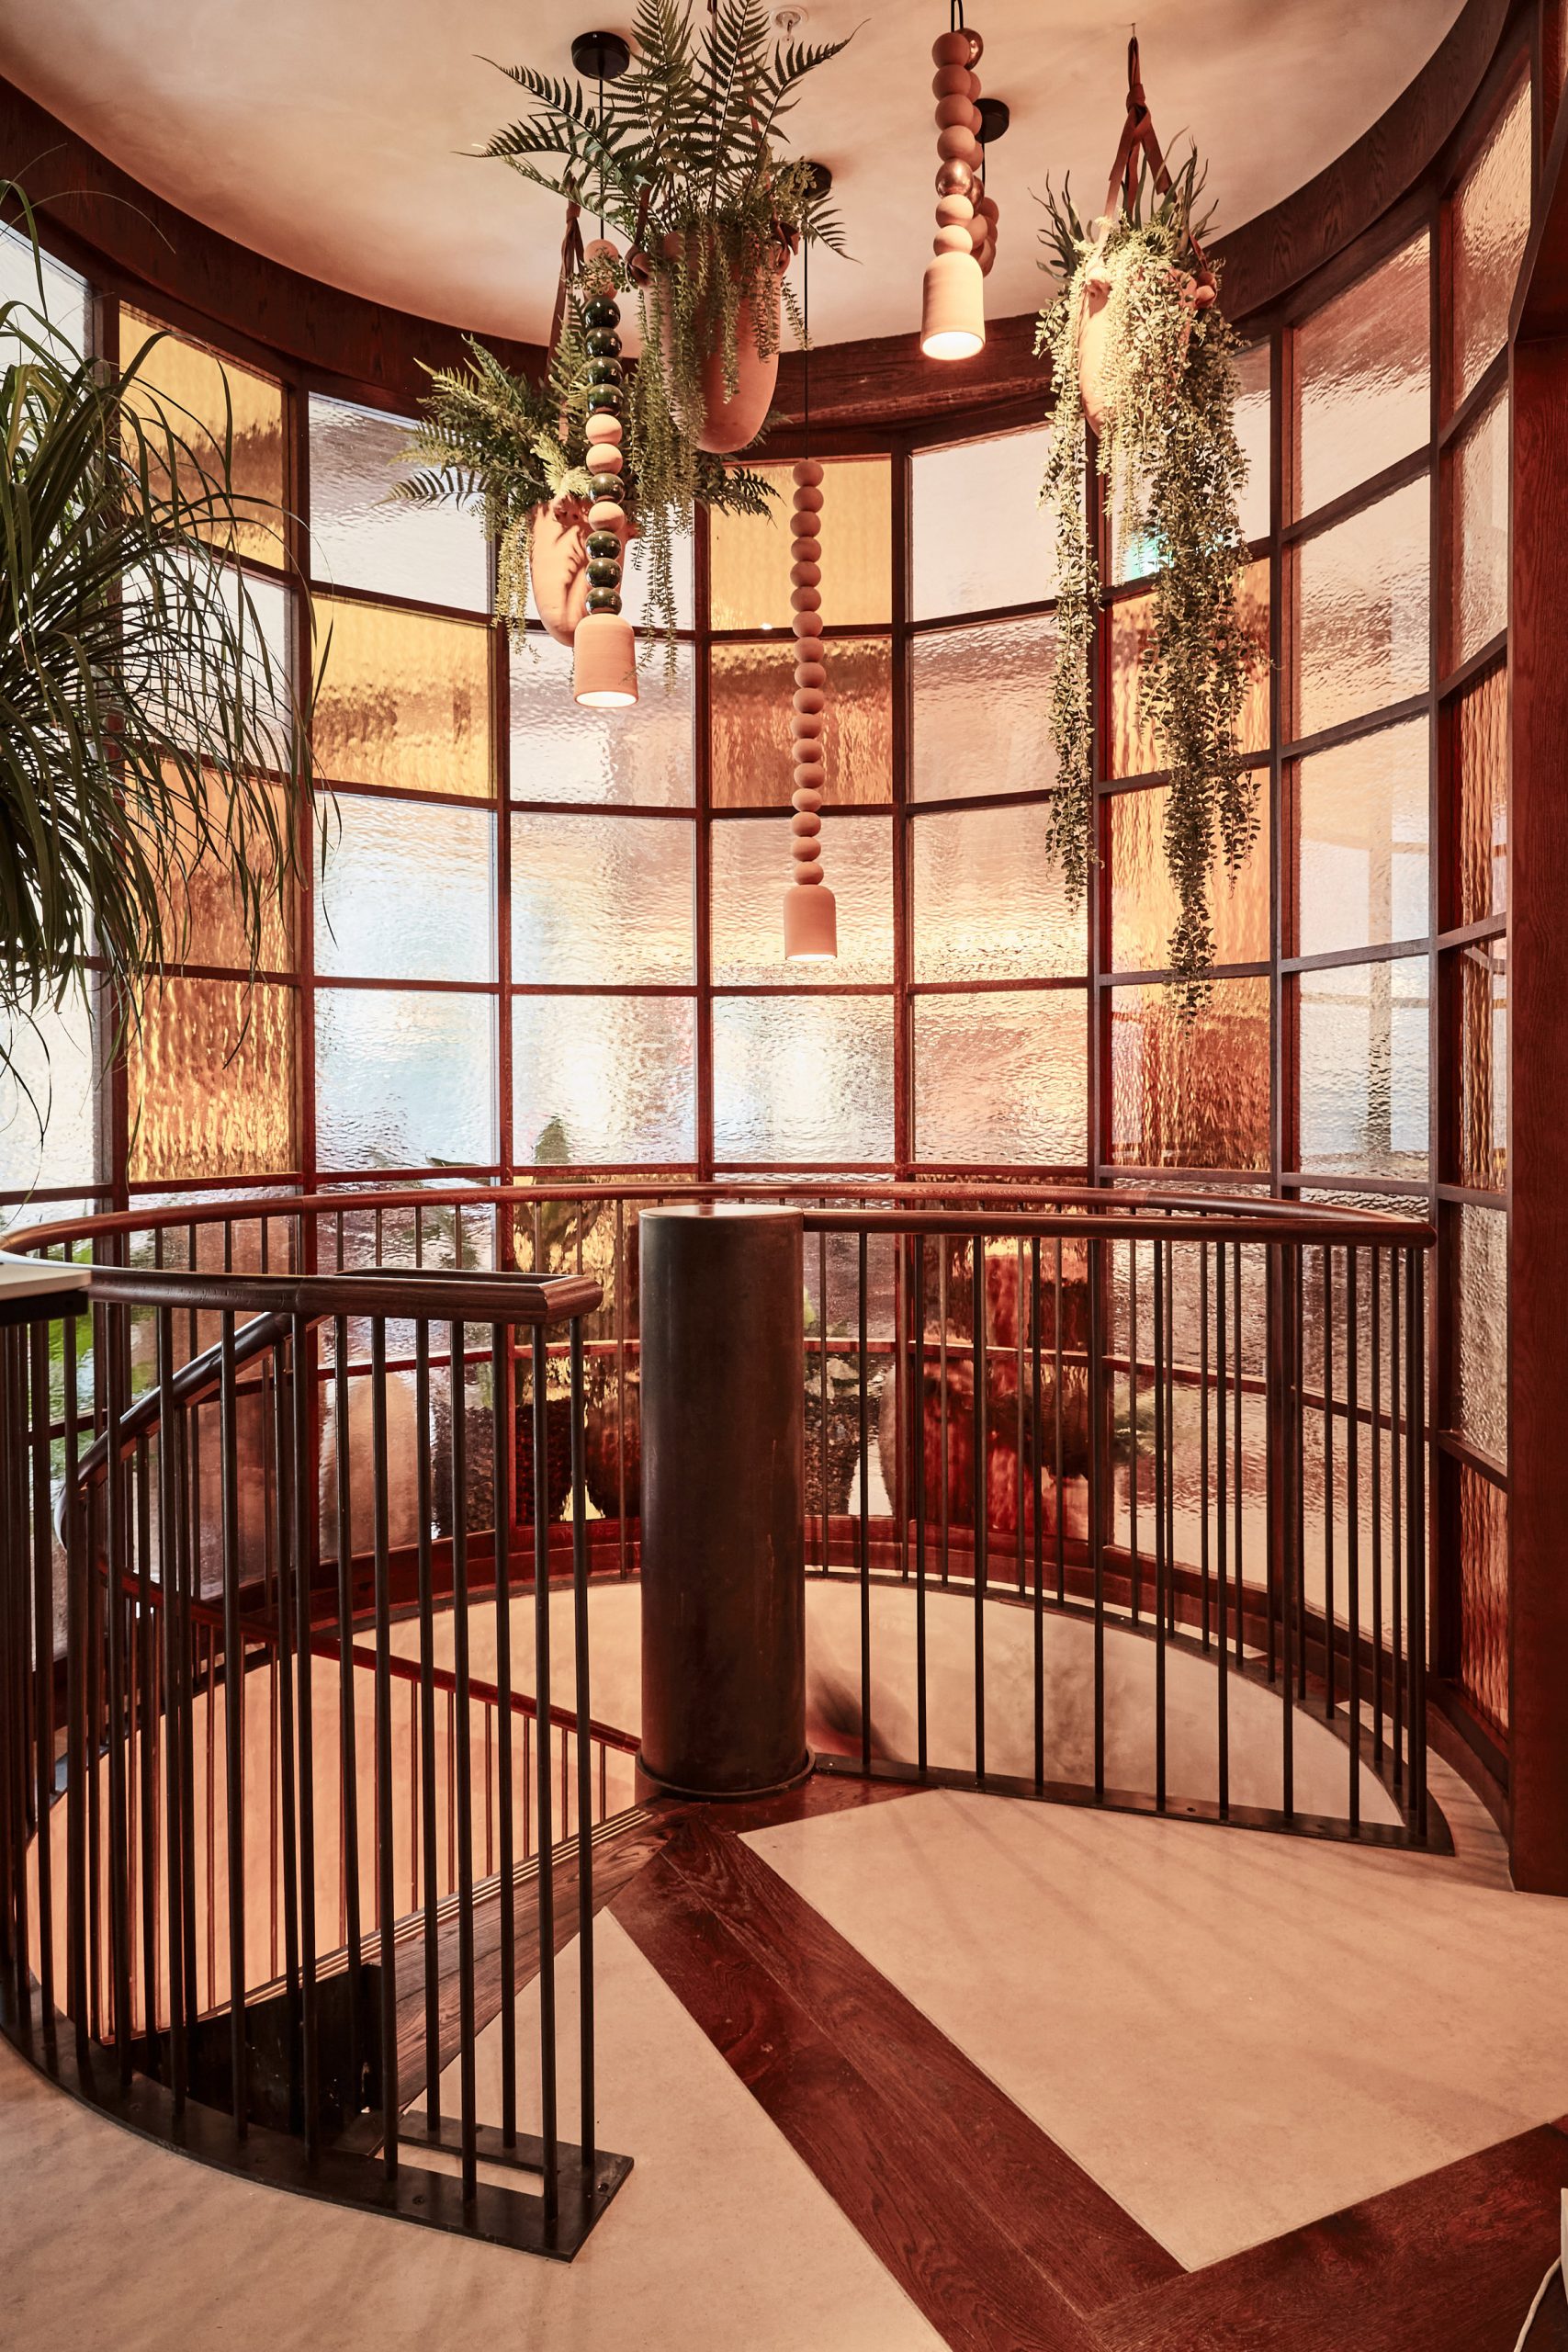 Kol restaurant in London includes spiral staircase